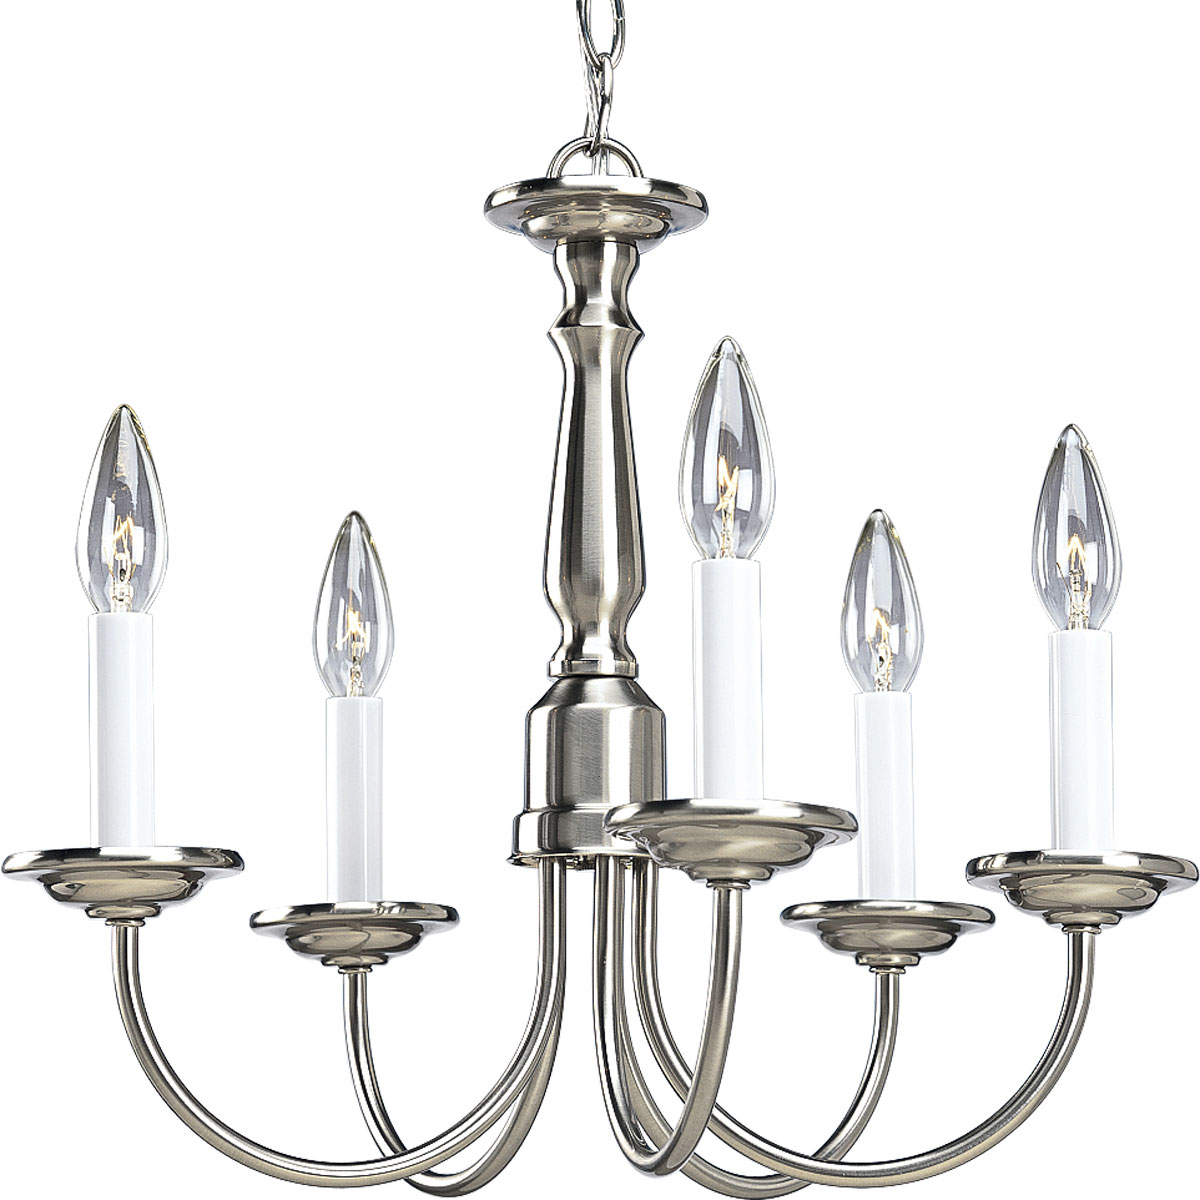 P4009-09 785247116447 This simple, classic five-light chandelier is popular in the vintage farmhouse inspired designs. White candle covers complete the look. Brushed Nickel finish.